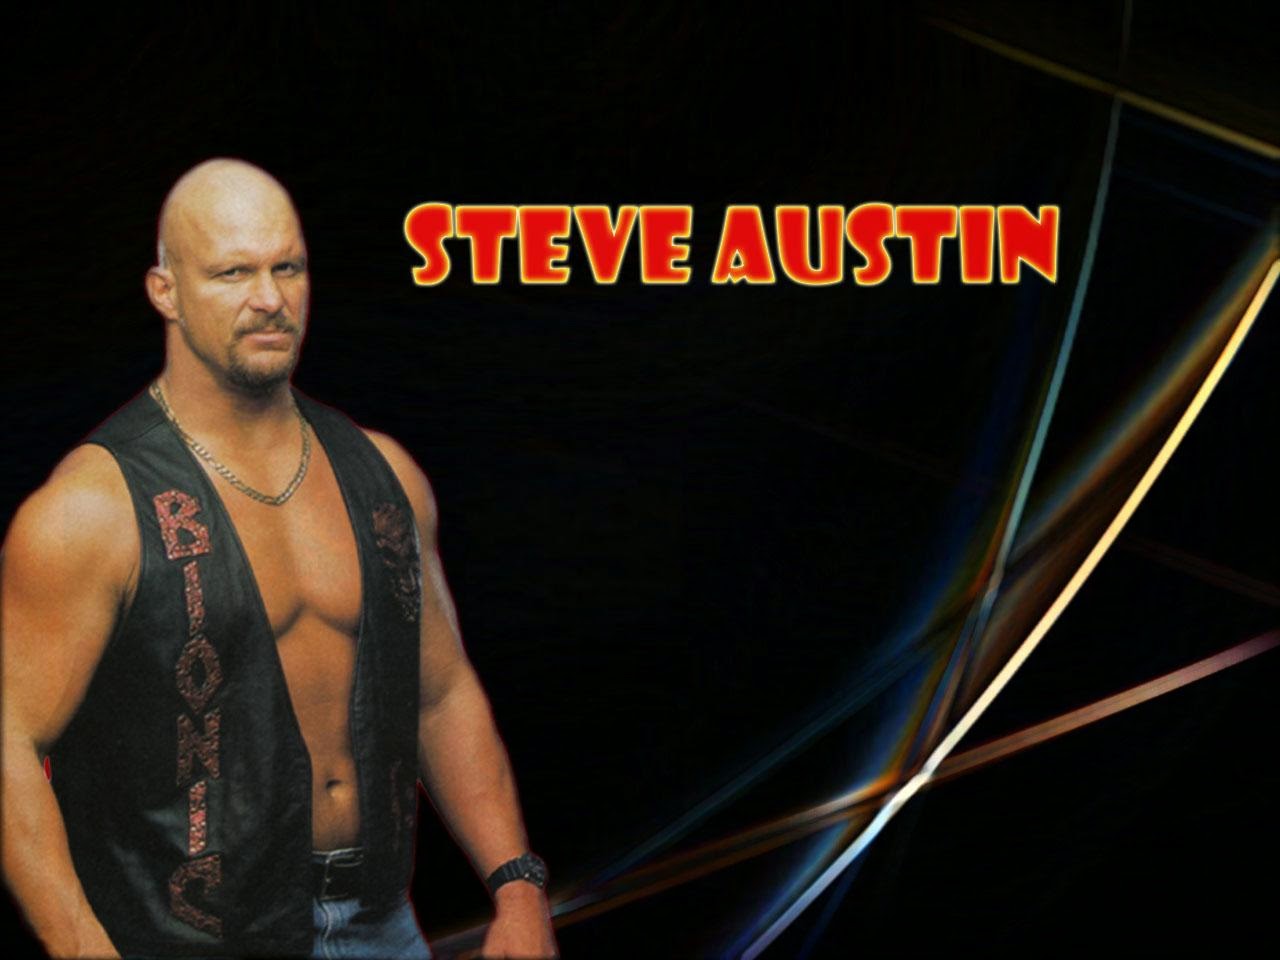 Stone Cold Steve Austin Hd Wallpapers Free Download - Stone Cold Steve  Austin Wood - 1280x960 Wallpaper 